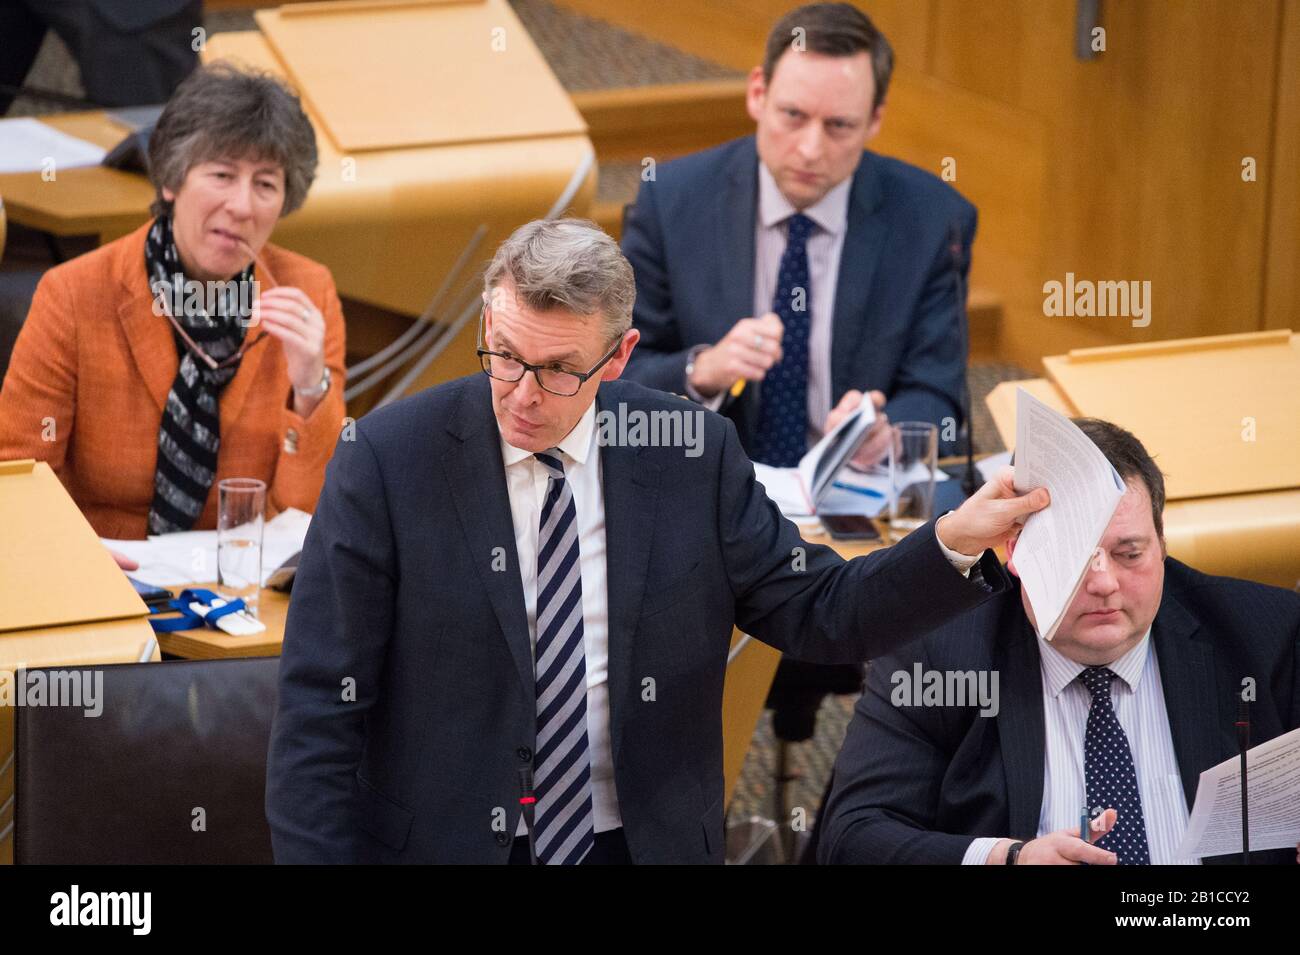 Edinburgh, UK. 20 February 2020.   Pictured: (centre) Adam Tomkins MSP - Shadow Cabinet Secretary for Strategy, Scottish Conservative and Unionist Party; (top left) Liz smith MSP - Chief Whip of the  Scottish Conservative and Unionist Party, (top right) Liam Kerr MSP - Deputy Leader of  the Scottish Conservative and Unionist PartyShadow Cabinet Secretary for Justice; (bottom right), Jamie Halcro Johnston MSP - Shadow Minister for Education for the Scottish Conservative and Unionist Party.    Scenes from inside the debating chamber of the Scottish Parliament in Holyrood, Edinburgh. Stock Photo